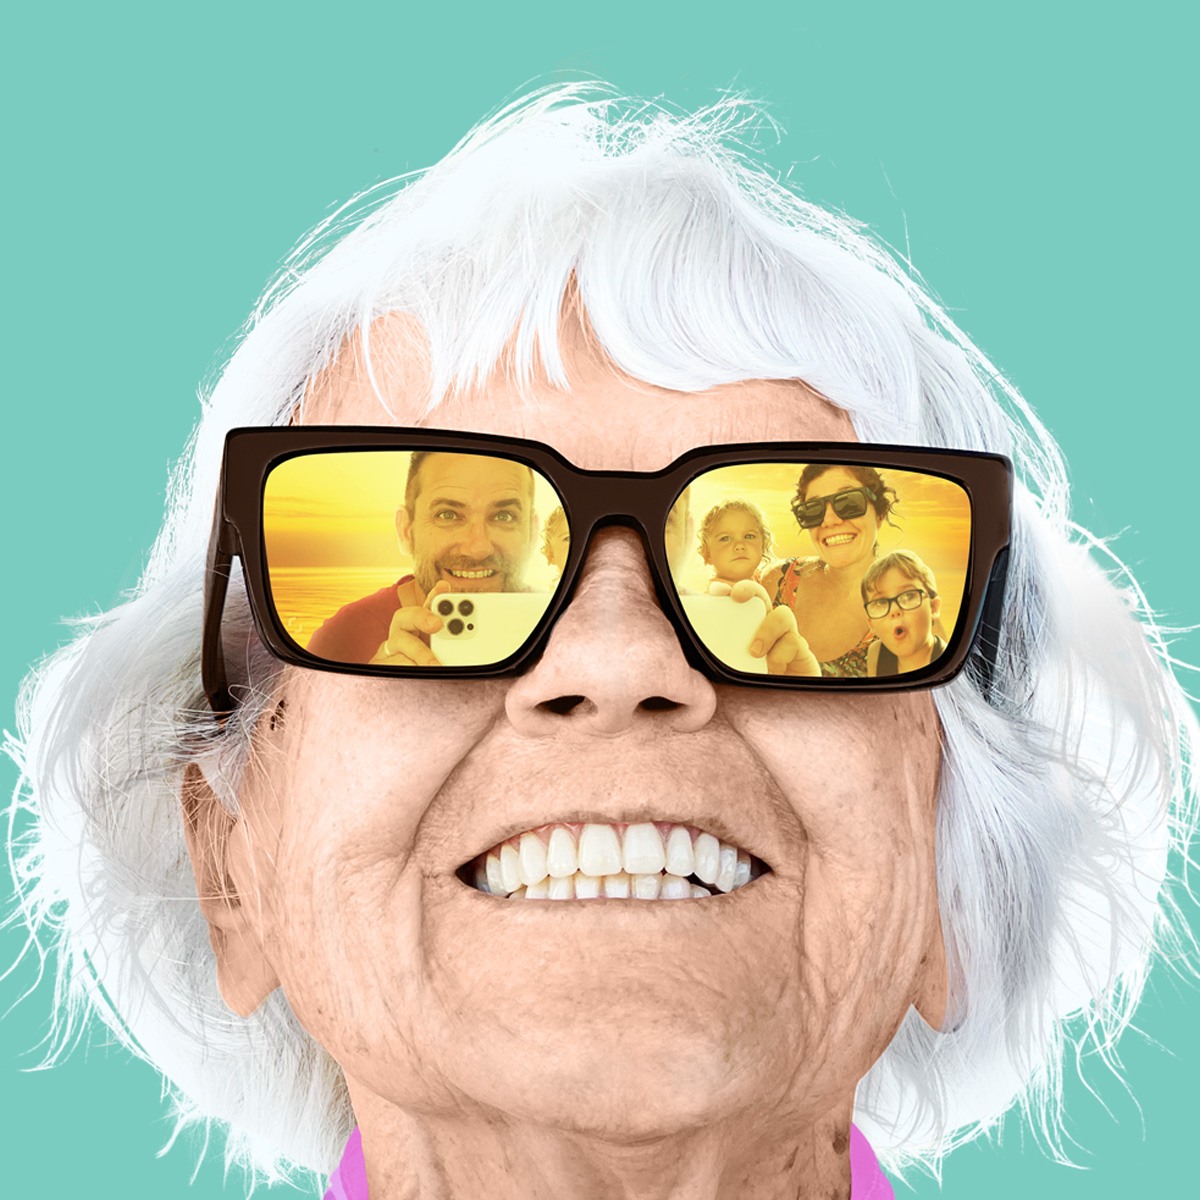 Promotional picture of a grandmother wearing sunglasses reflecting a young family taking her picture